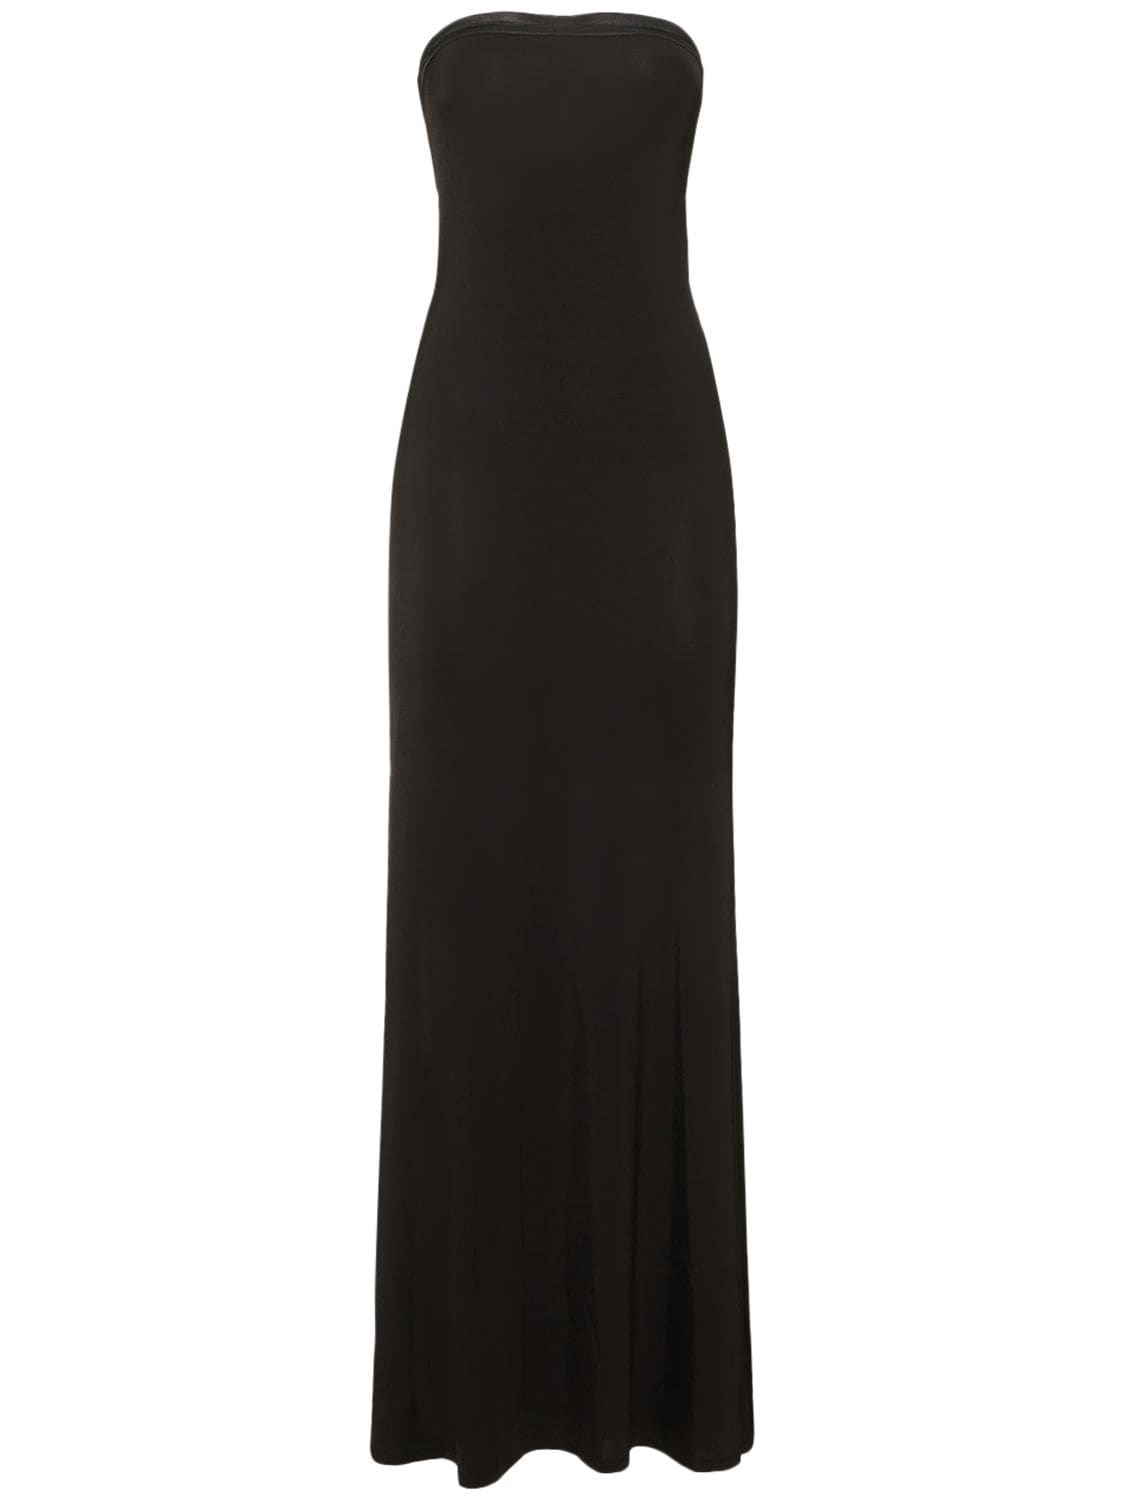 Image of Athens Stretch Knit Long Strapless Dress